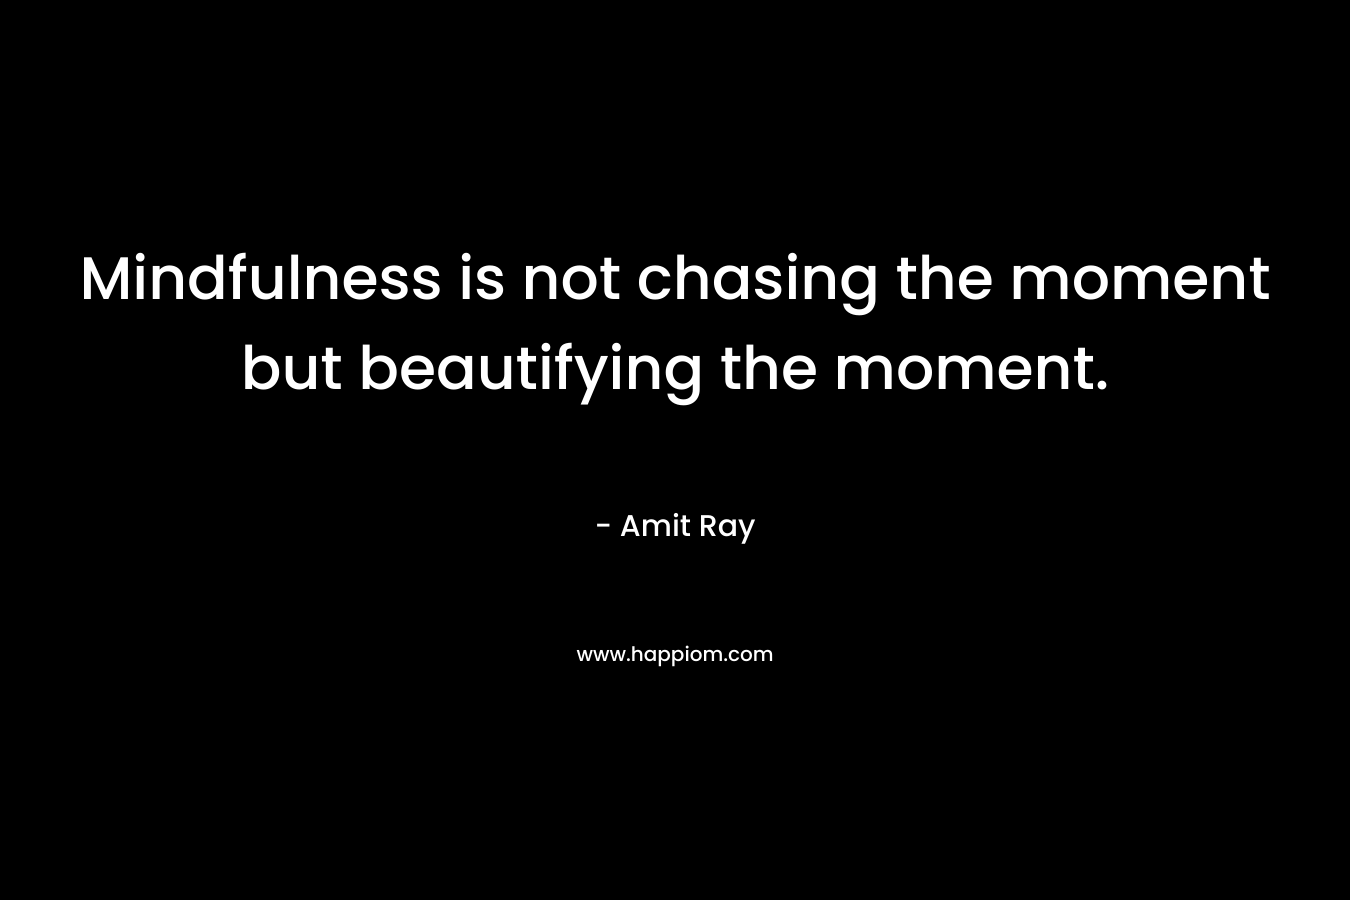 Mindfulness is not chasing the moment but beautifying the moment. – Amit Ray